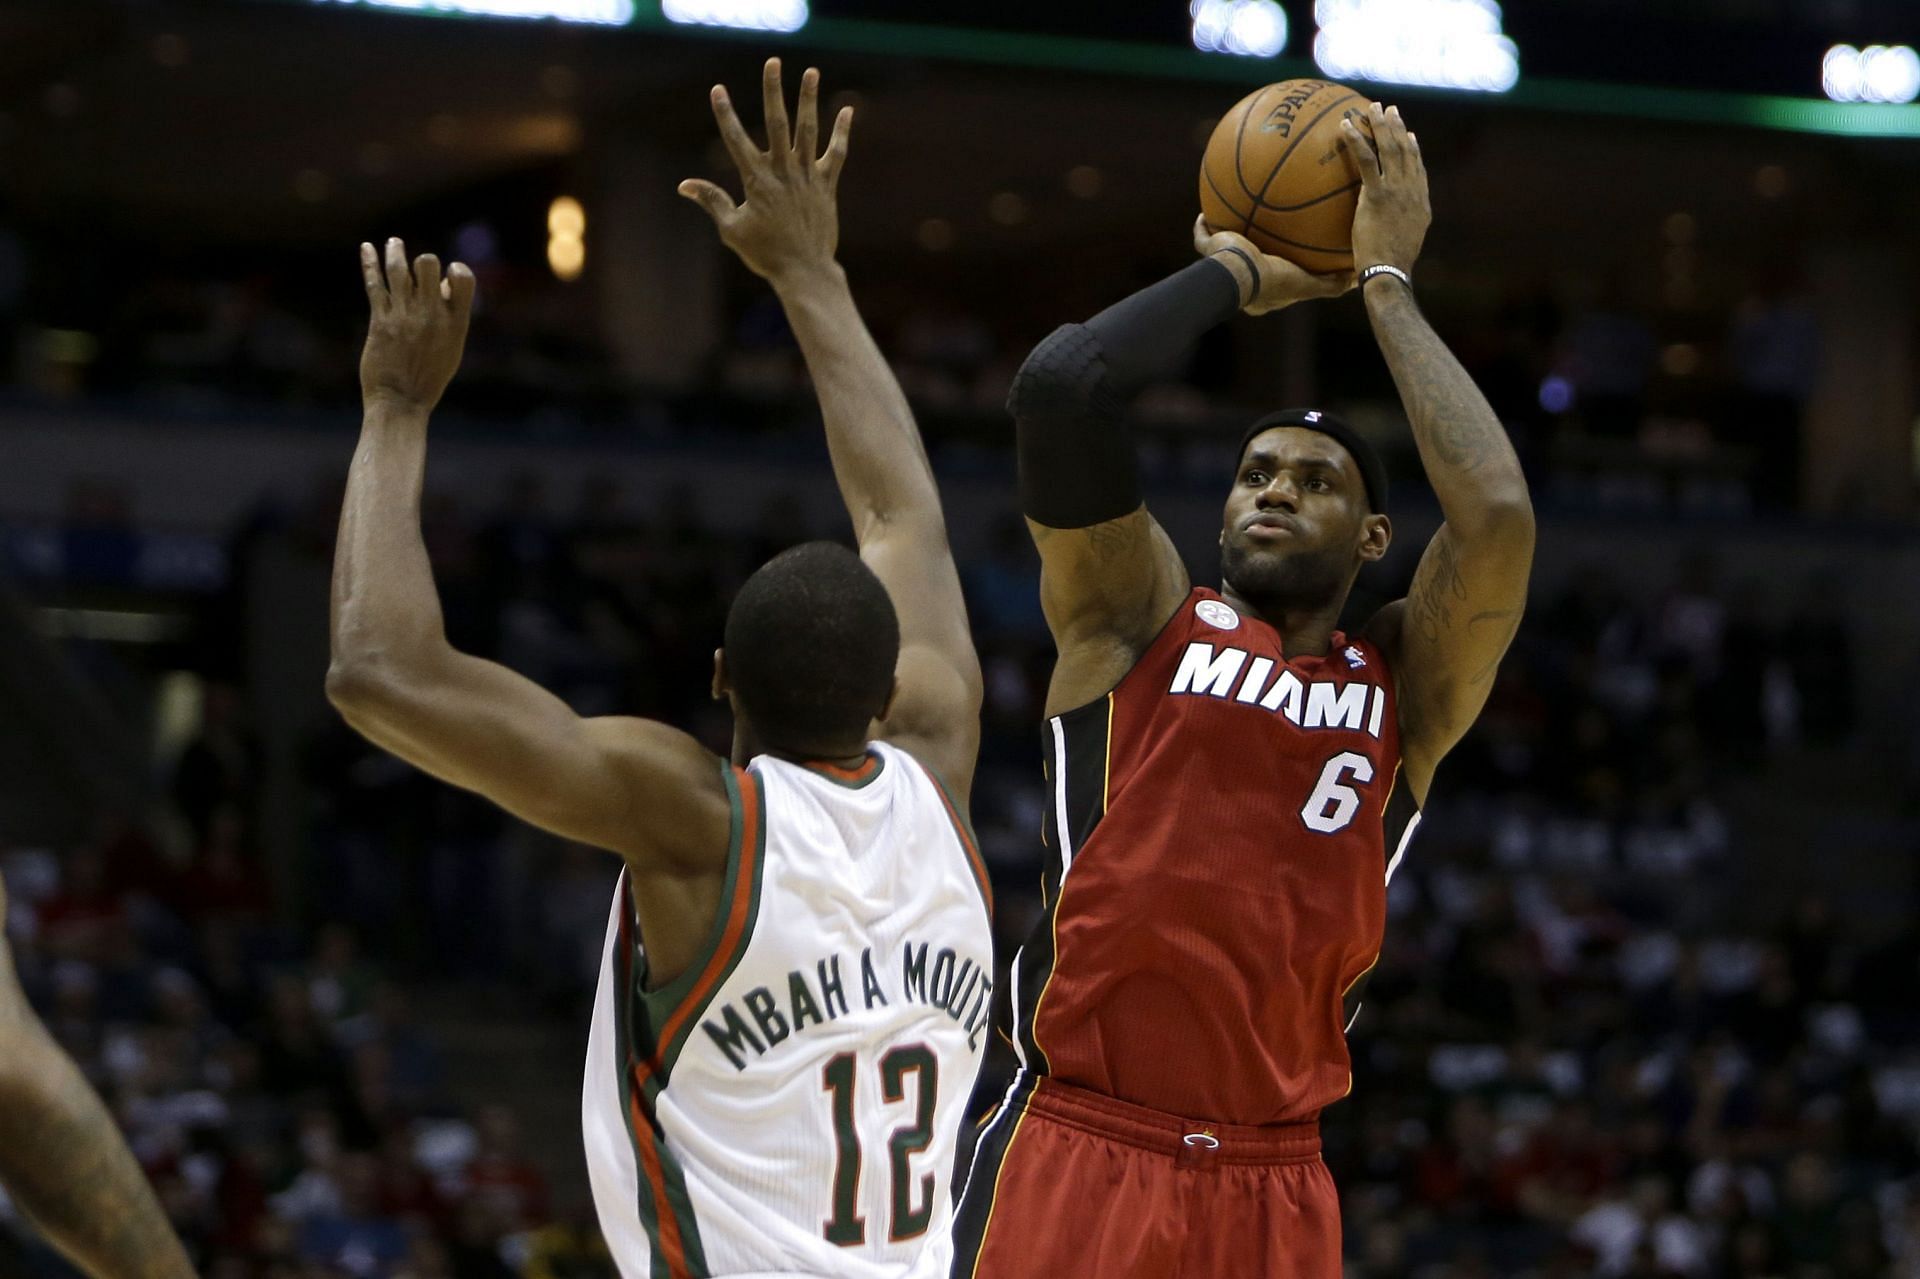 LeBron James shooting the ball as a member of the Miami Heat.